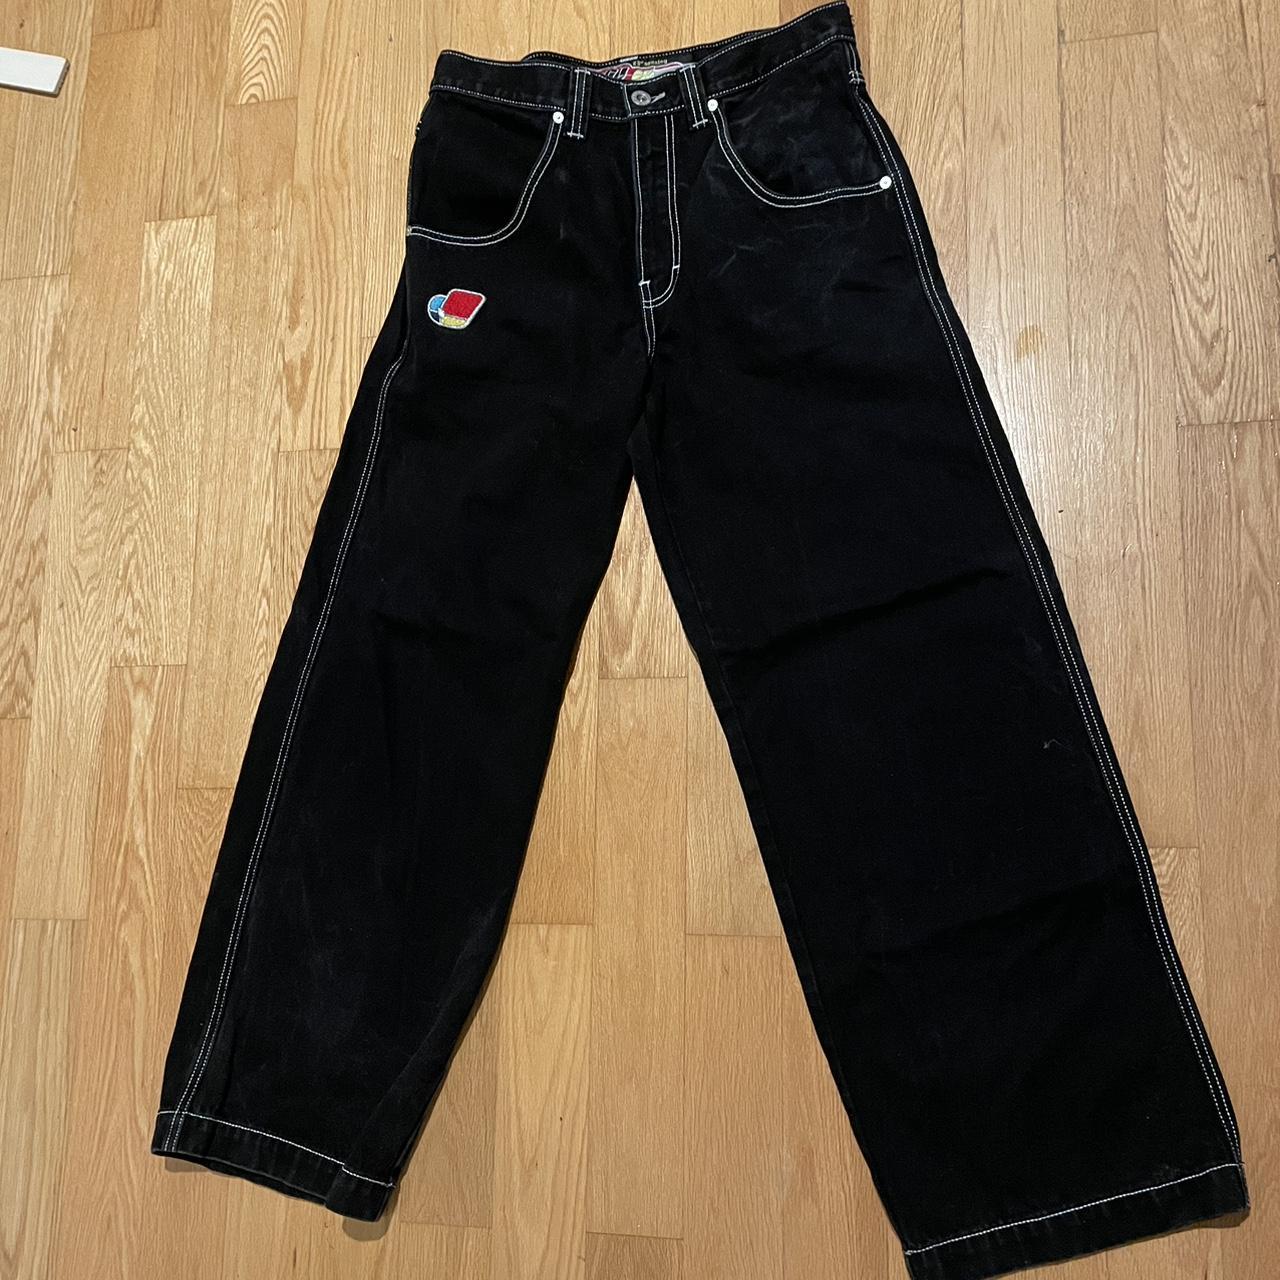 Black Jnco pipes, 32 x 32 cool embroidery White... - Depop